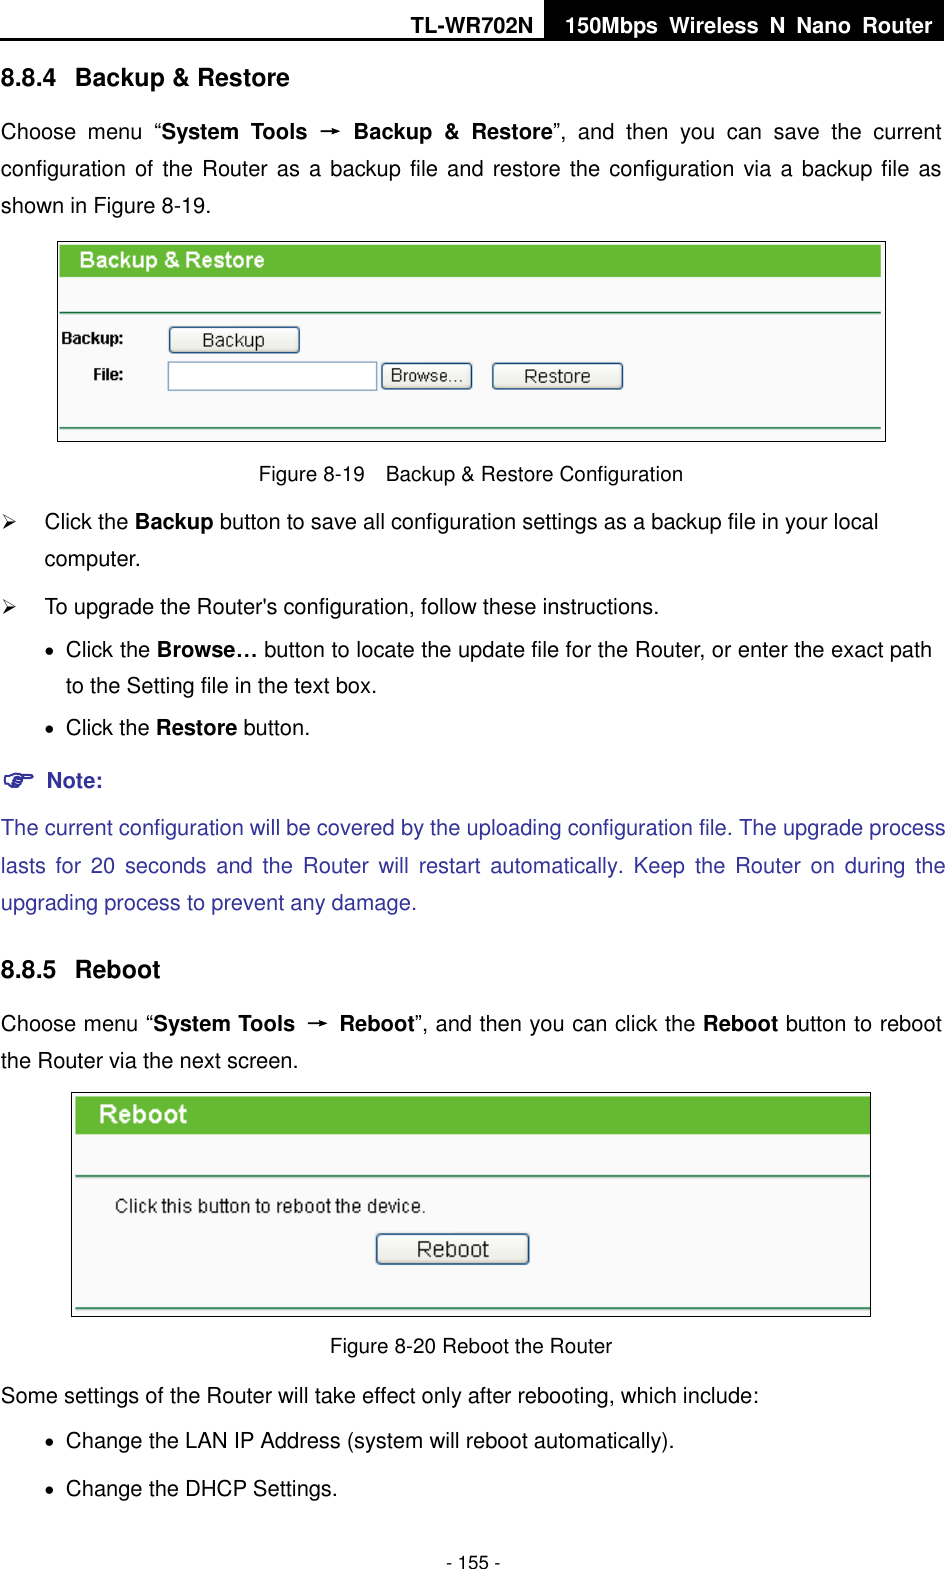 TL-WR702N 150Mbps  Wireless  N  Nano  Router  - 155 - 8.8.4  Backup &amp; Restore Choose  menu  “System  Tools  →  Backup  &amp;  Restore”,  and  then  you  can  save  the  current configuration of the Router as a backup file and restore the configuration via a backup file as shown in Figure 8-19.  Figure 8-19    Backup &amp; Restore Configuration  Click the Backup button to save all configuration settings as a backup file in your local computer.    To upgrade the Router&apos;s configuration, follow these instructions.  Click the Browse… button to locate the update file for the Router, or enter the exact path to the Setting file in the text box.  Click the Restore button.    Note: The current configuration will be covered by the uploading configuration file. The upgrade process lasts for  20  seconds and  the  Router  will  restart  automatically. Keep  the  Router on  during the upgrading process to prevent any damage.   8.8.5  Reboot Choose menu “System Tools  →  Reboot”, and then you can click the Reboot button to reboot the Router via the next screen.  Figure 8-20 Reboot the Router Some settings of the Router will take effect only after rebooting, which include:  Change the LAN IP Address (system will reboot automatically).  Change the DHCP Settings. 